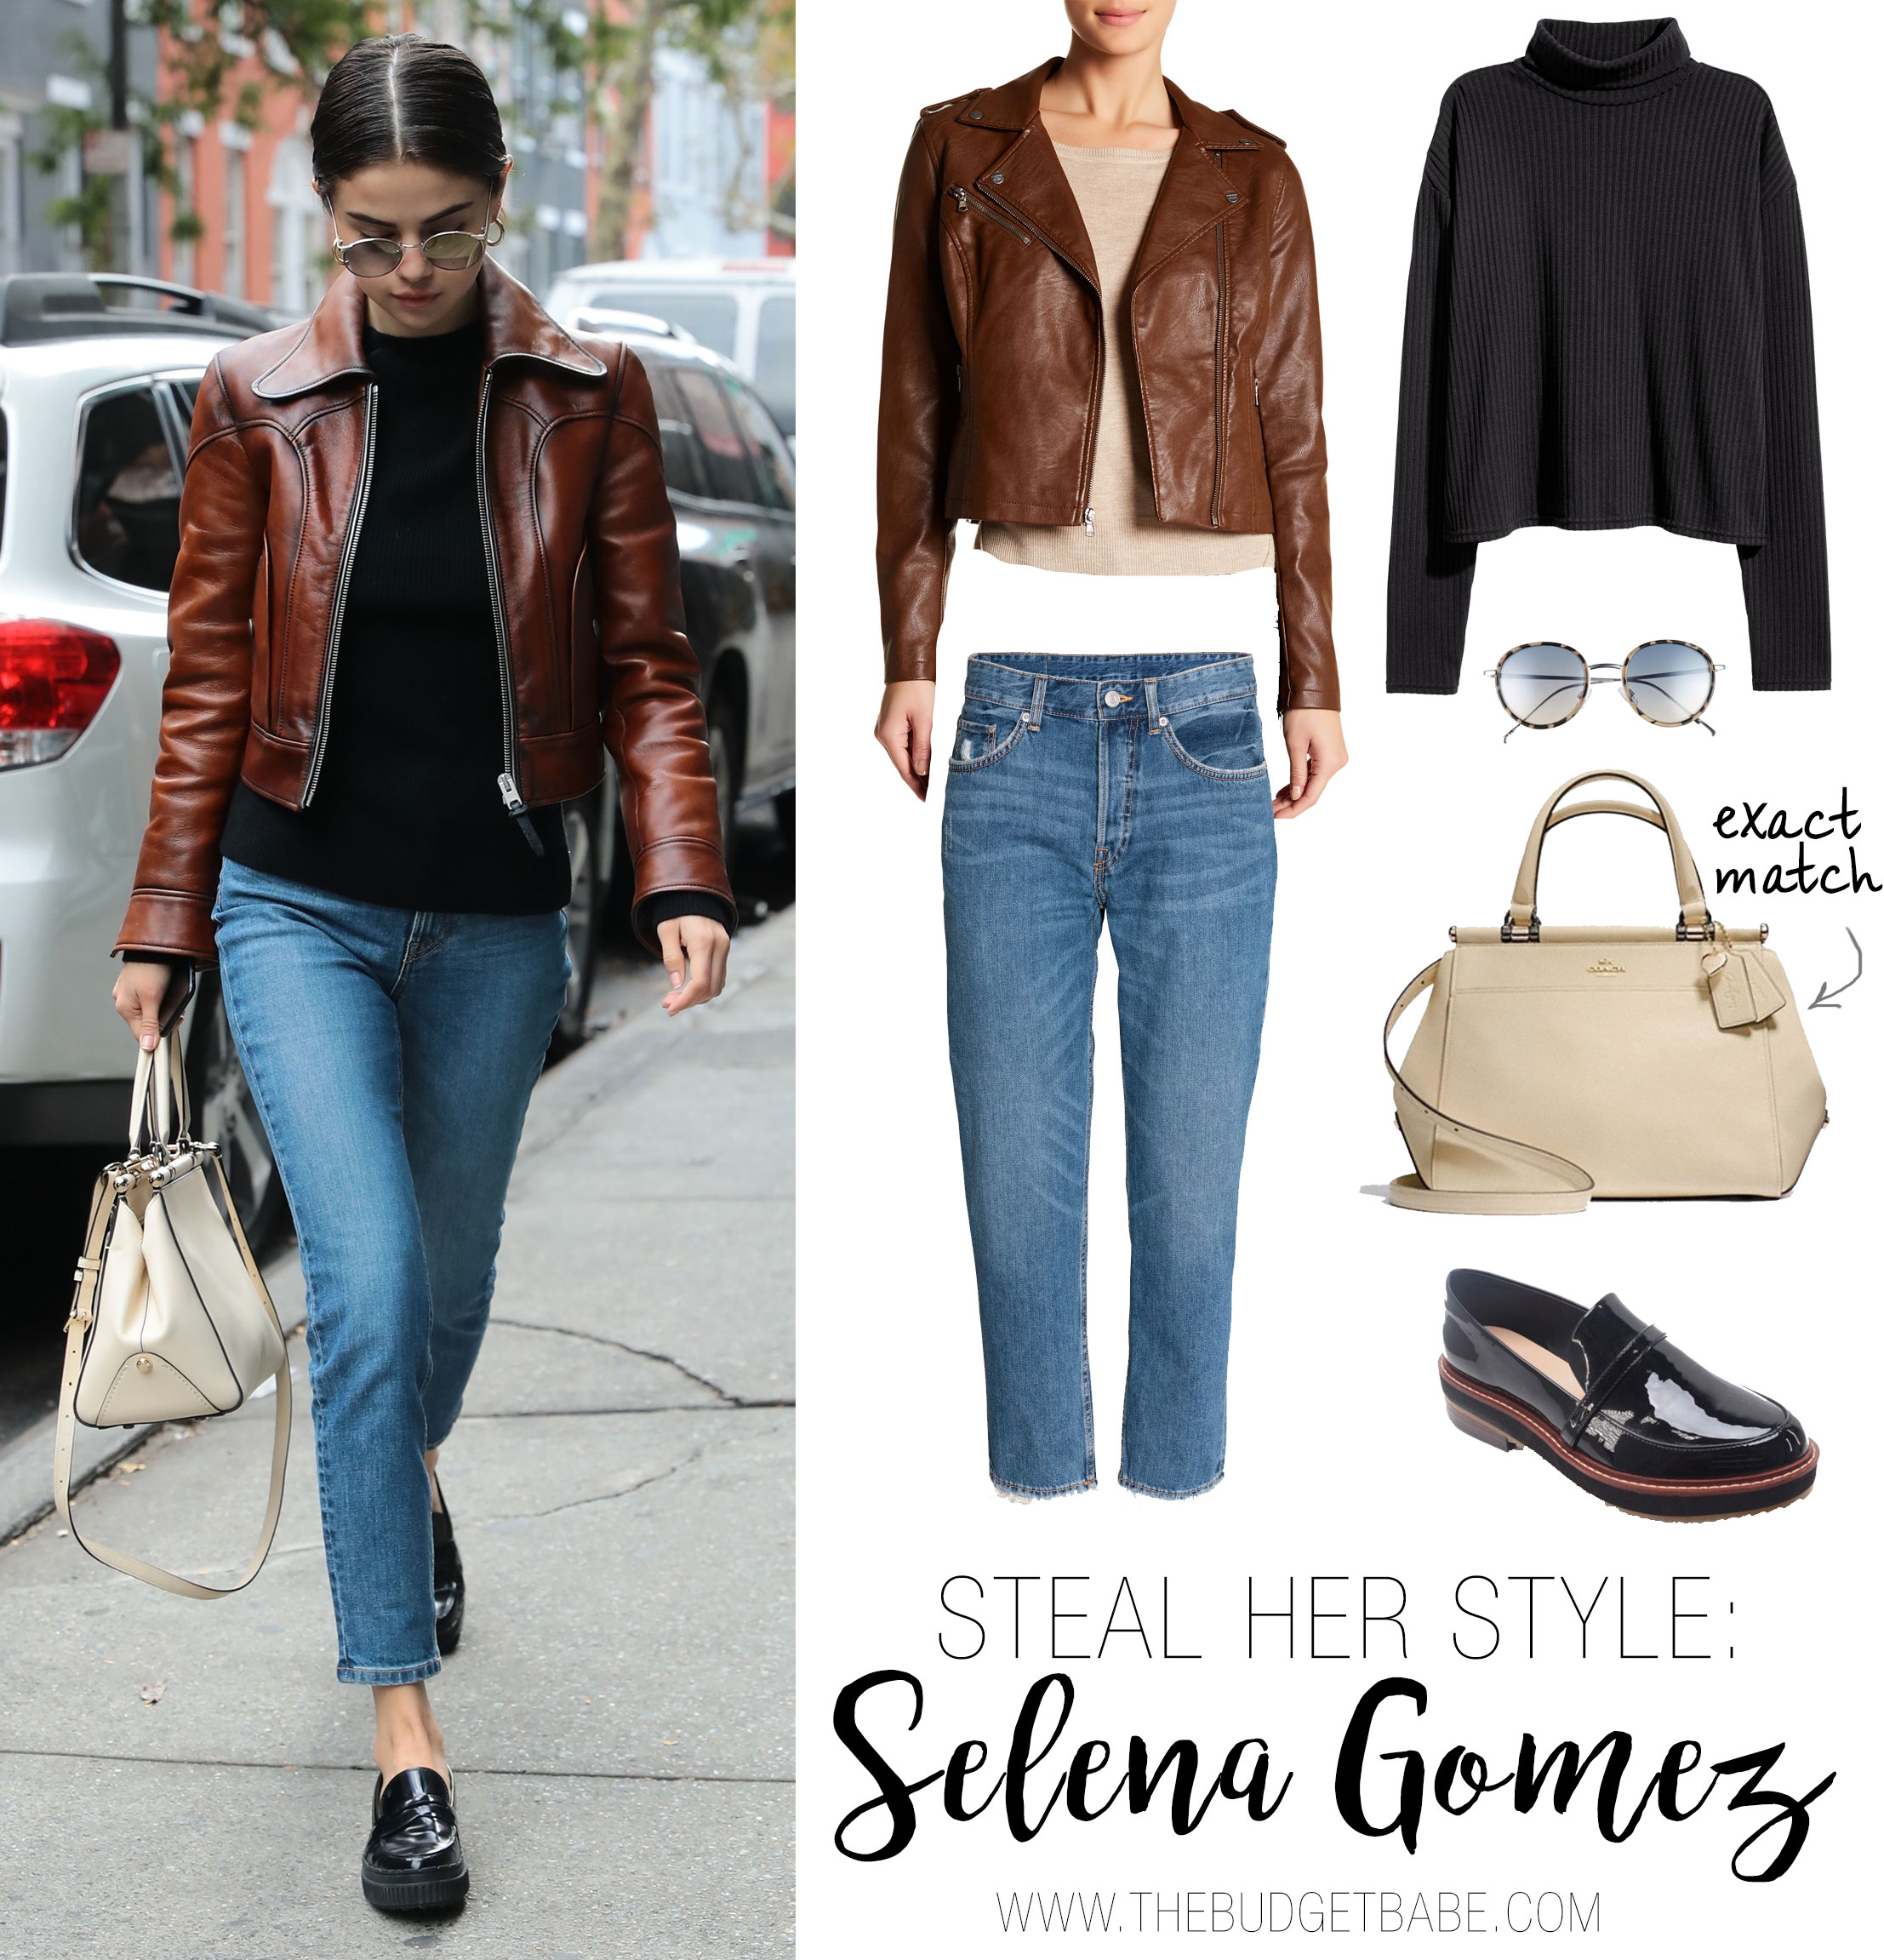 Selena Gomez wears a brown leather moto jacket, black sweater and black loafer flats.